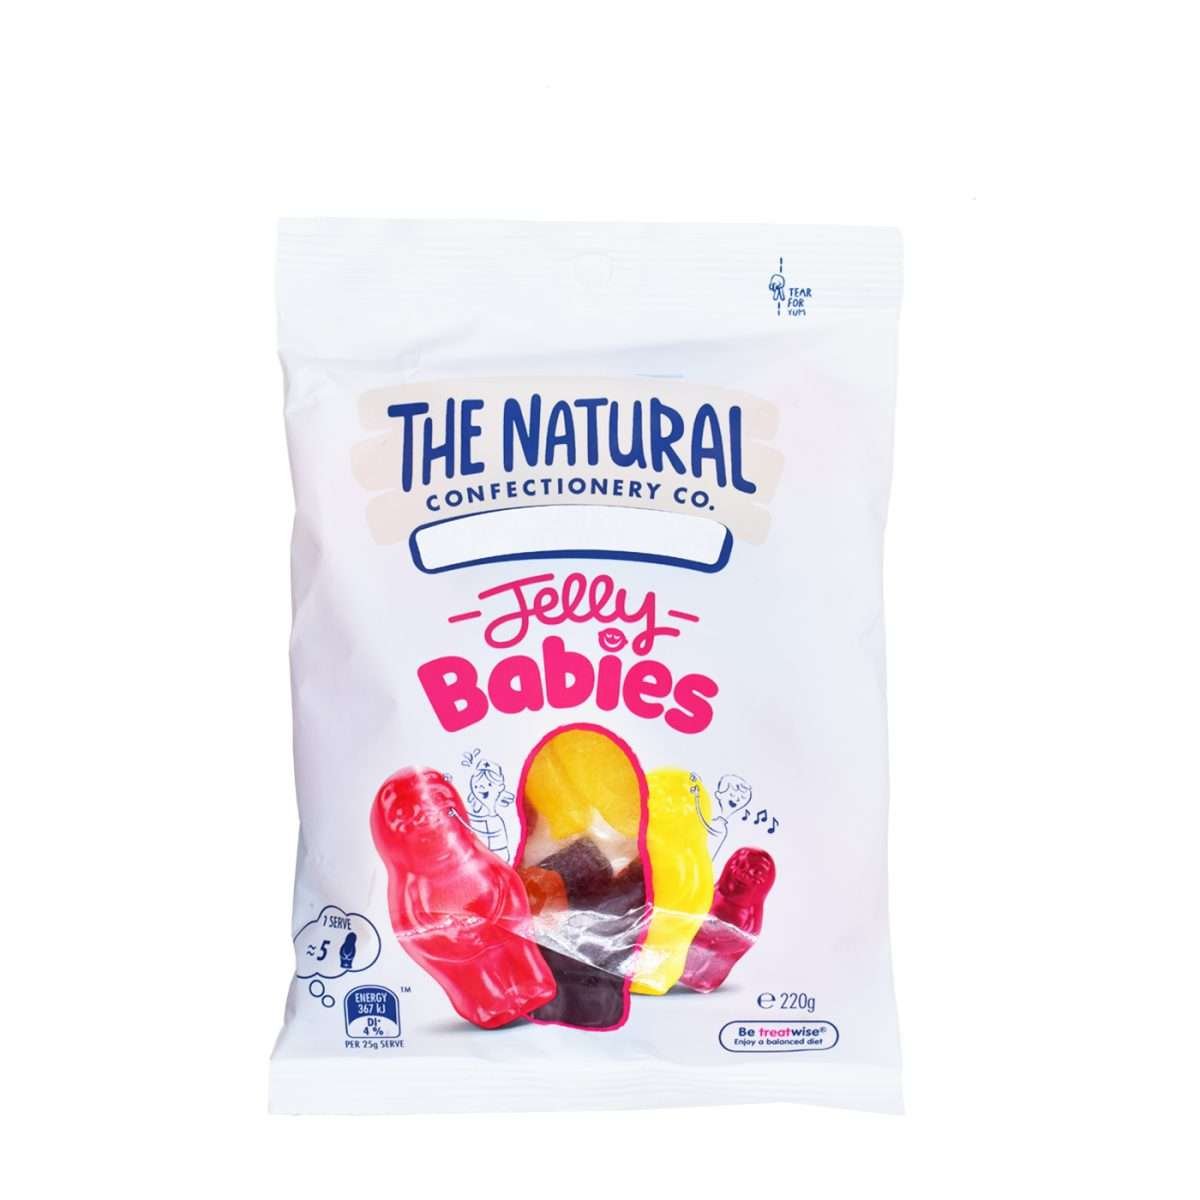 TNCC Jelly Babies - Bali Direct - Bali's Online Whole Foods Store